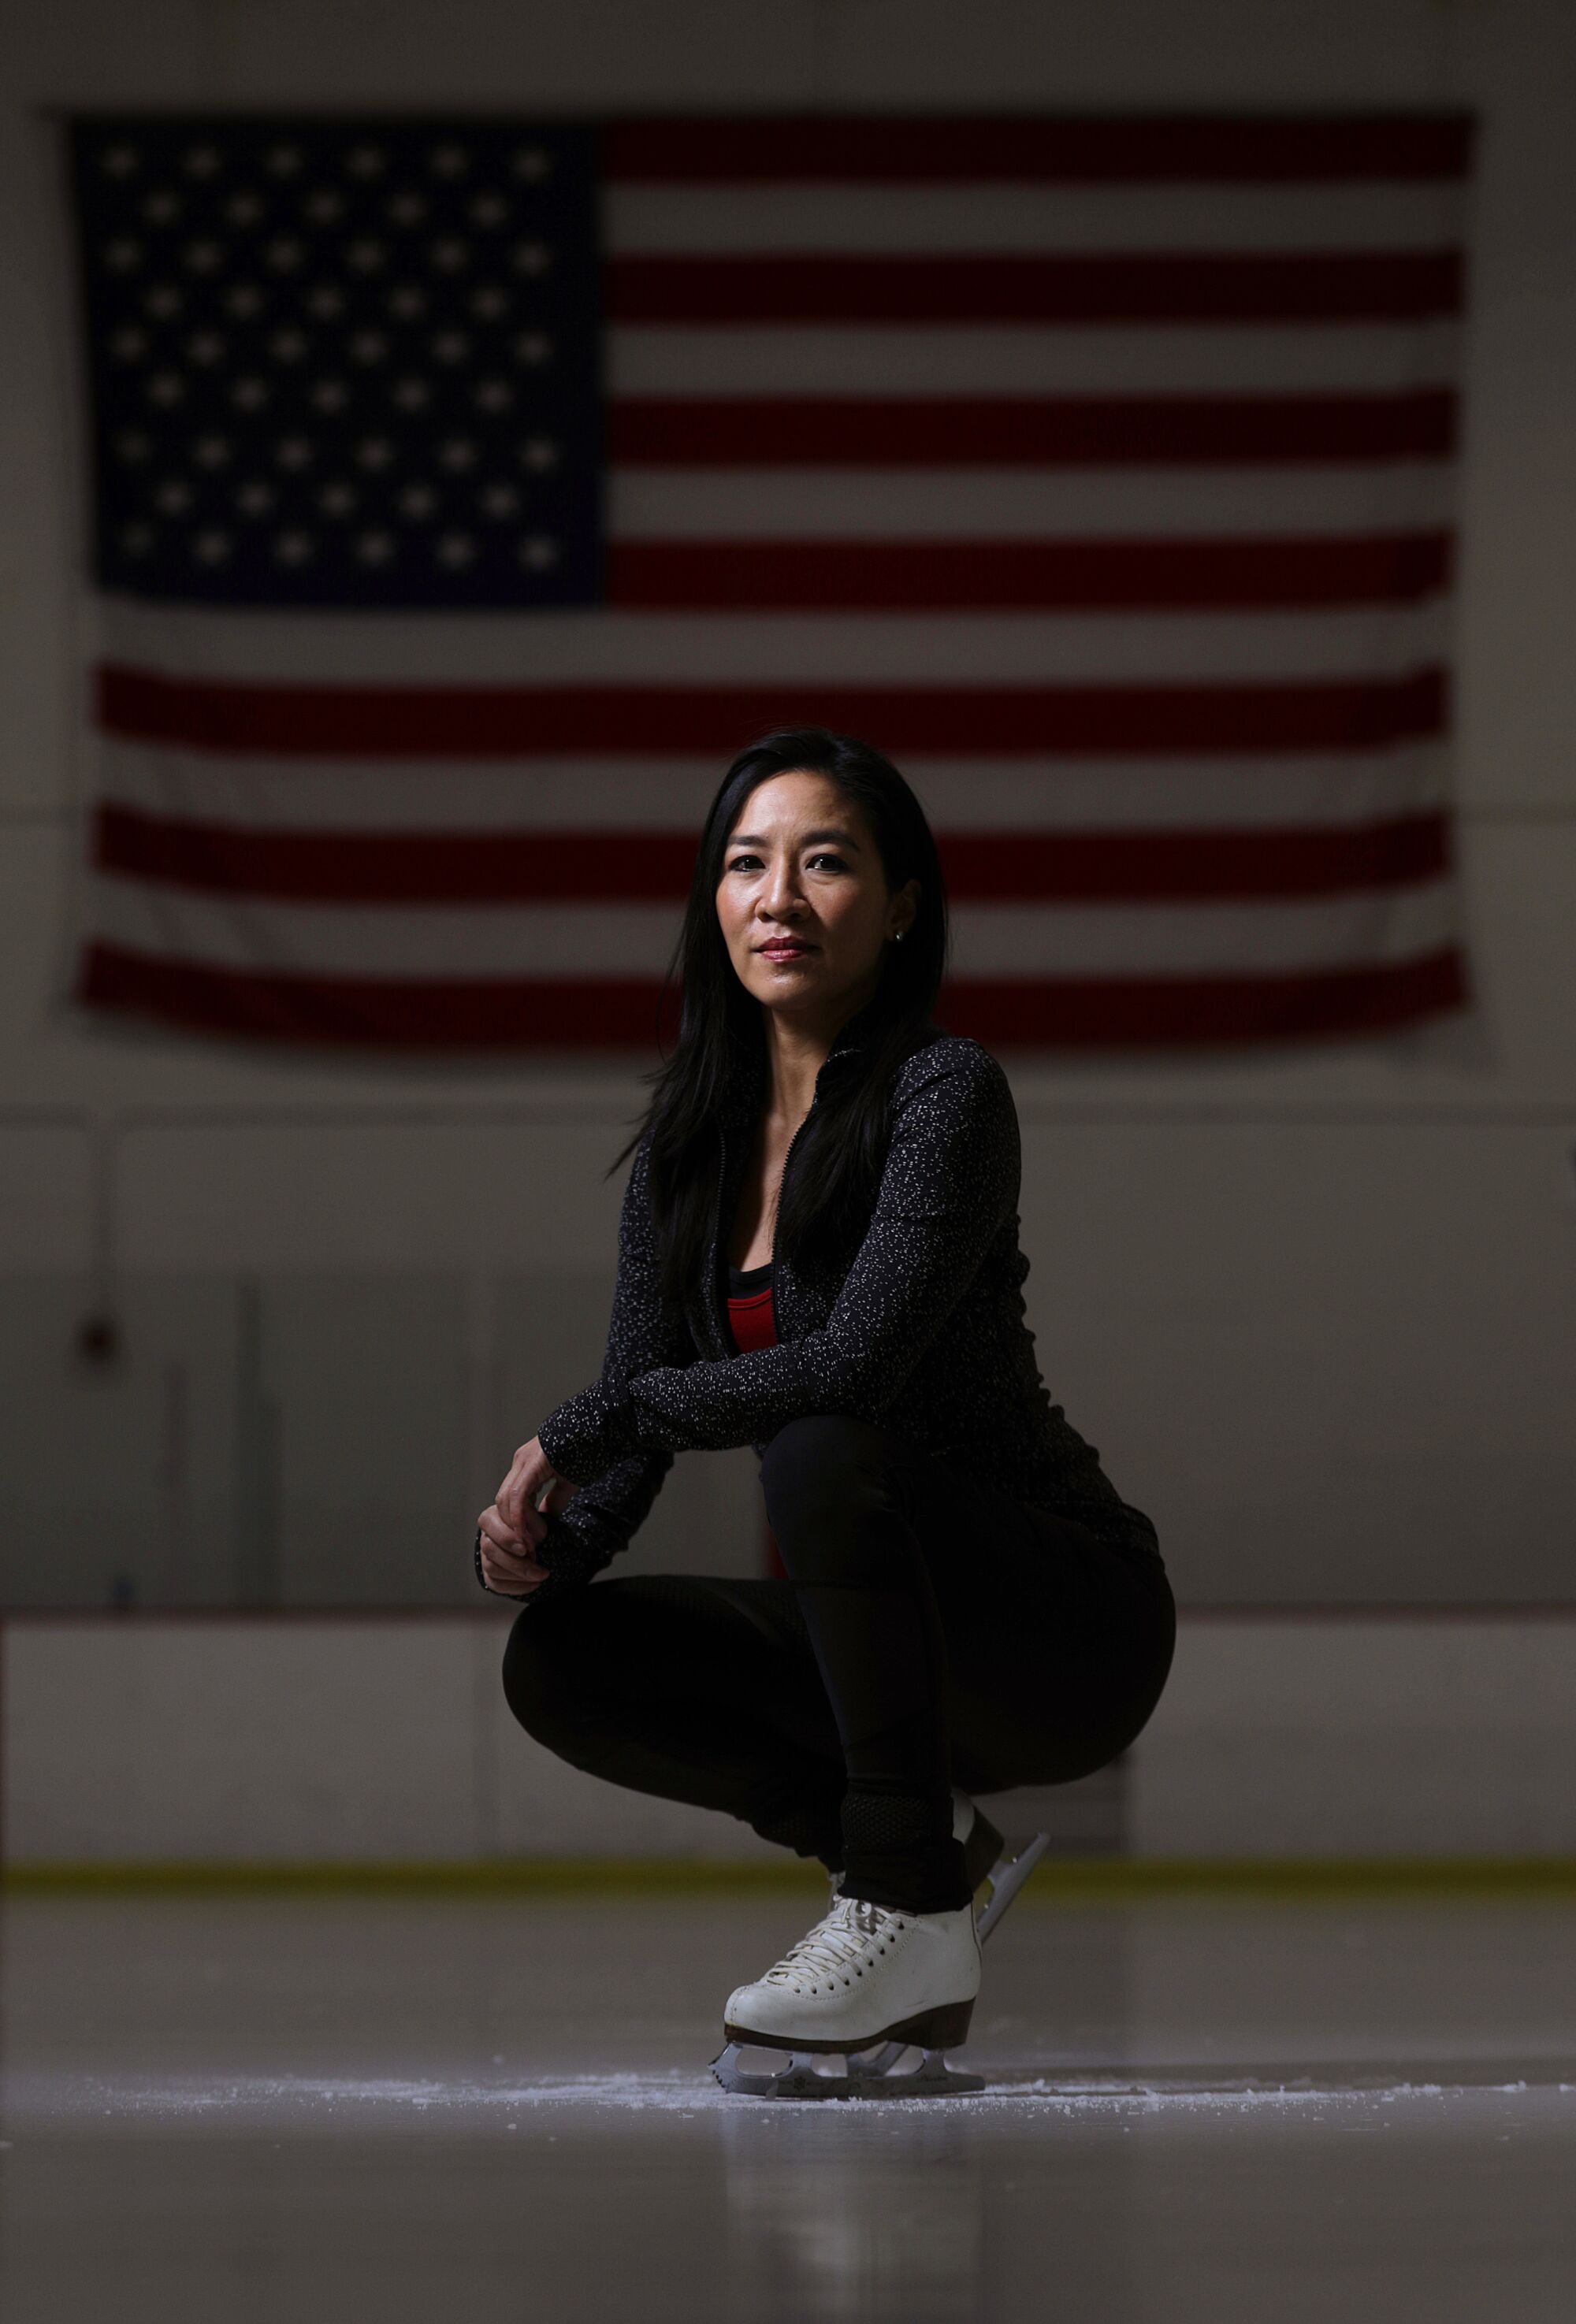 Michelle Kwan is photographed at her family's ice rink at East West Ice Palace in Artesia, California.